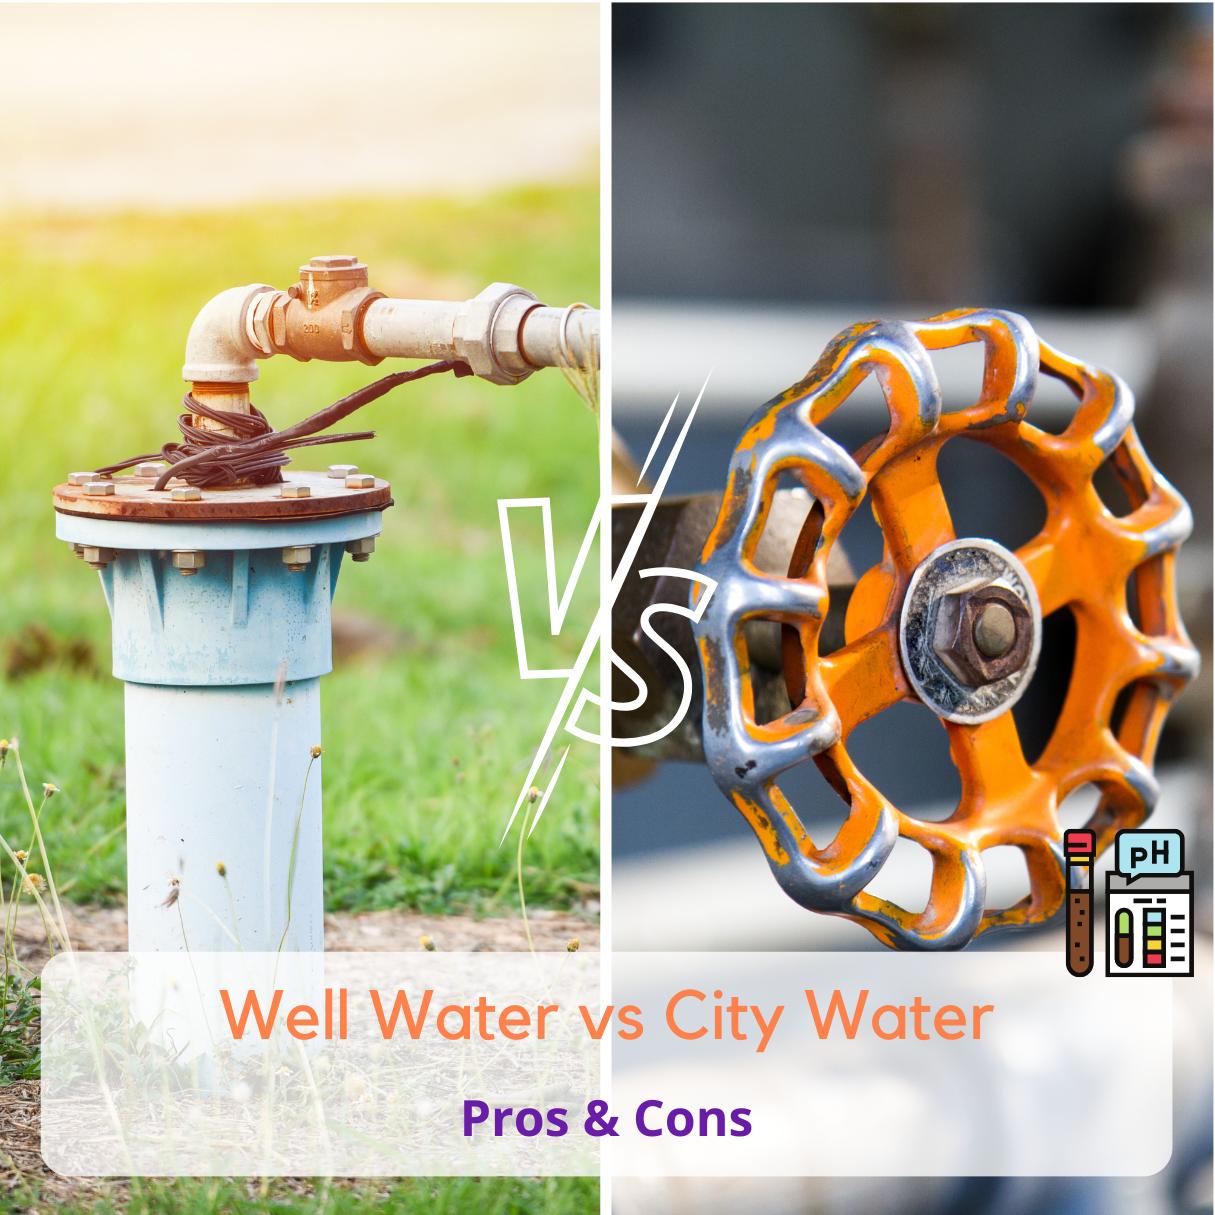 Well Water vs City Water: Pros & Cons